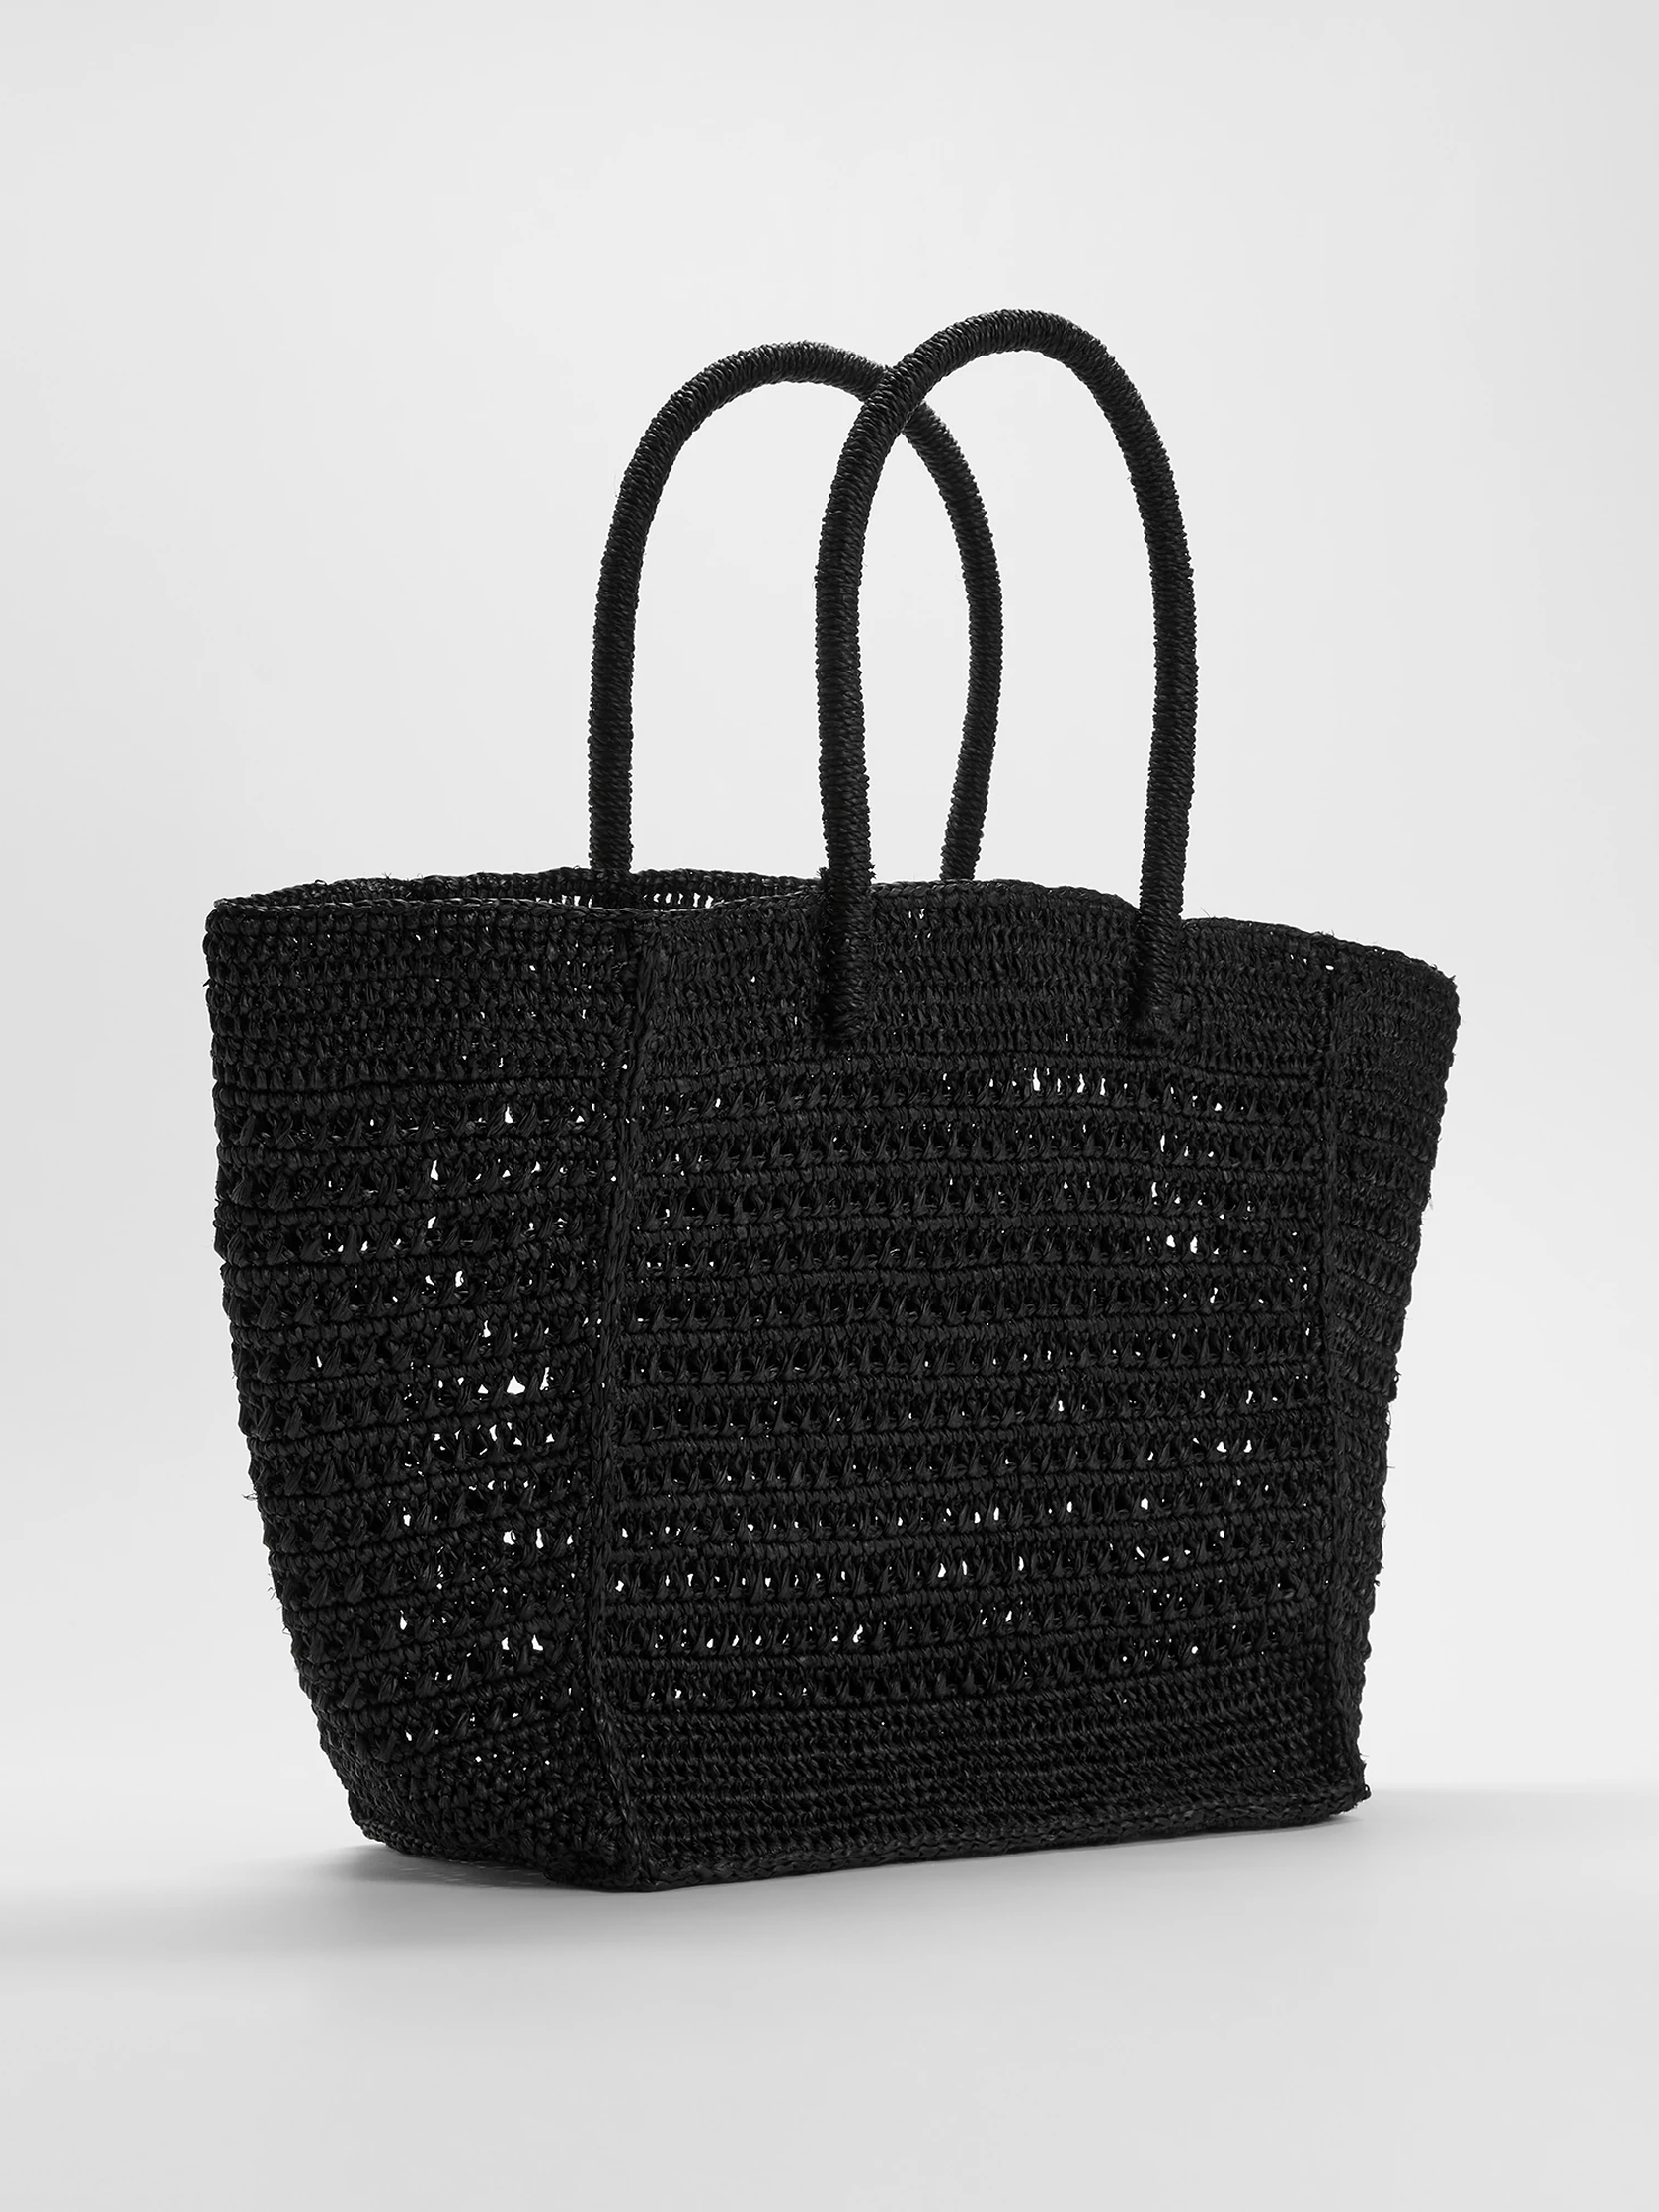 Mar Y Sol for EILEEN FISHER Beach Tote | EILEEN FISHER